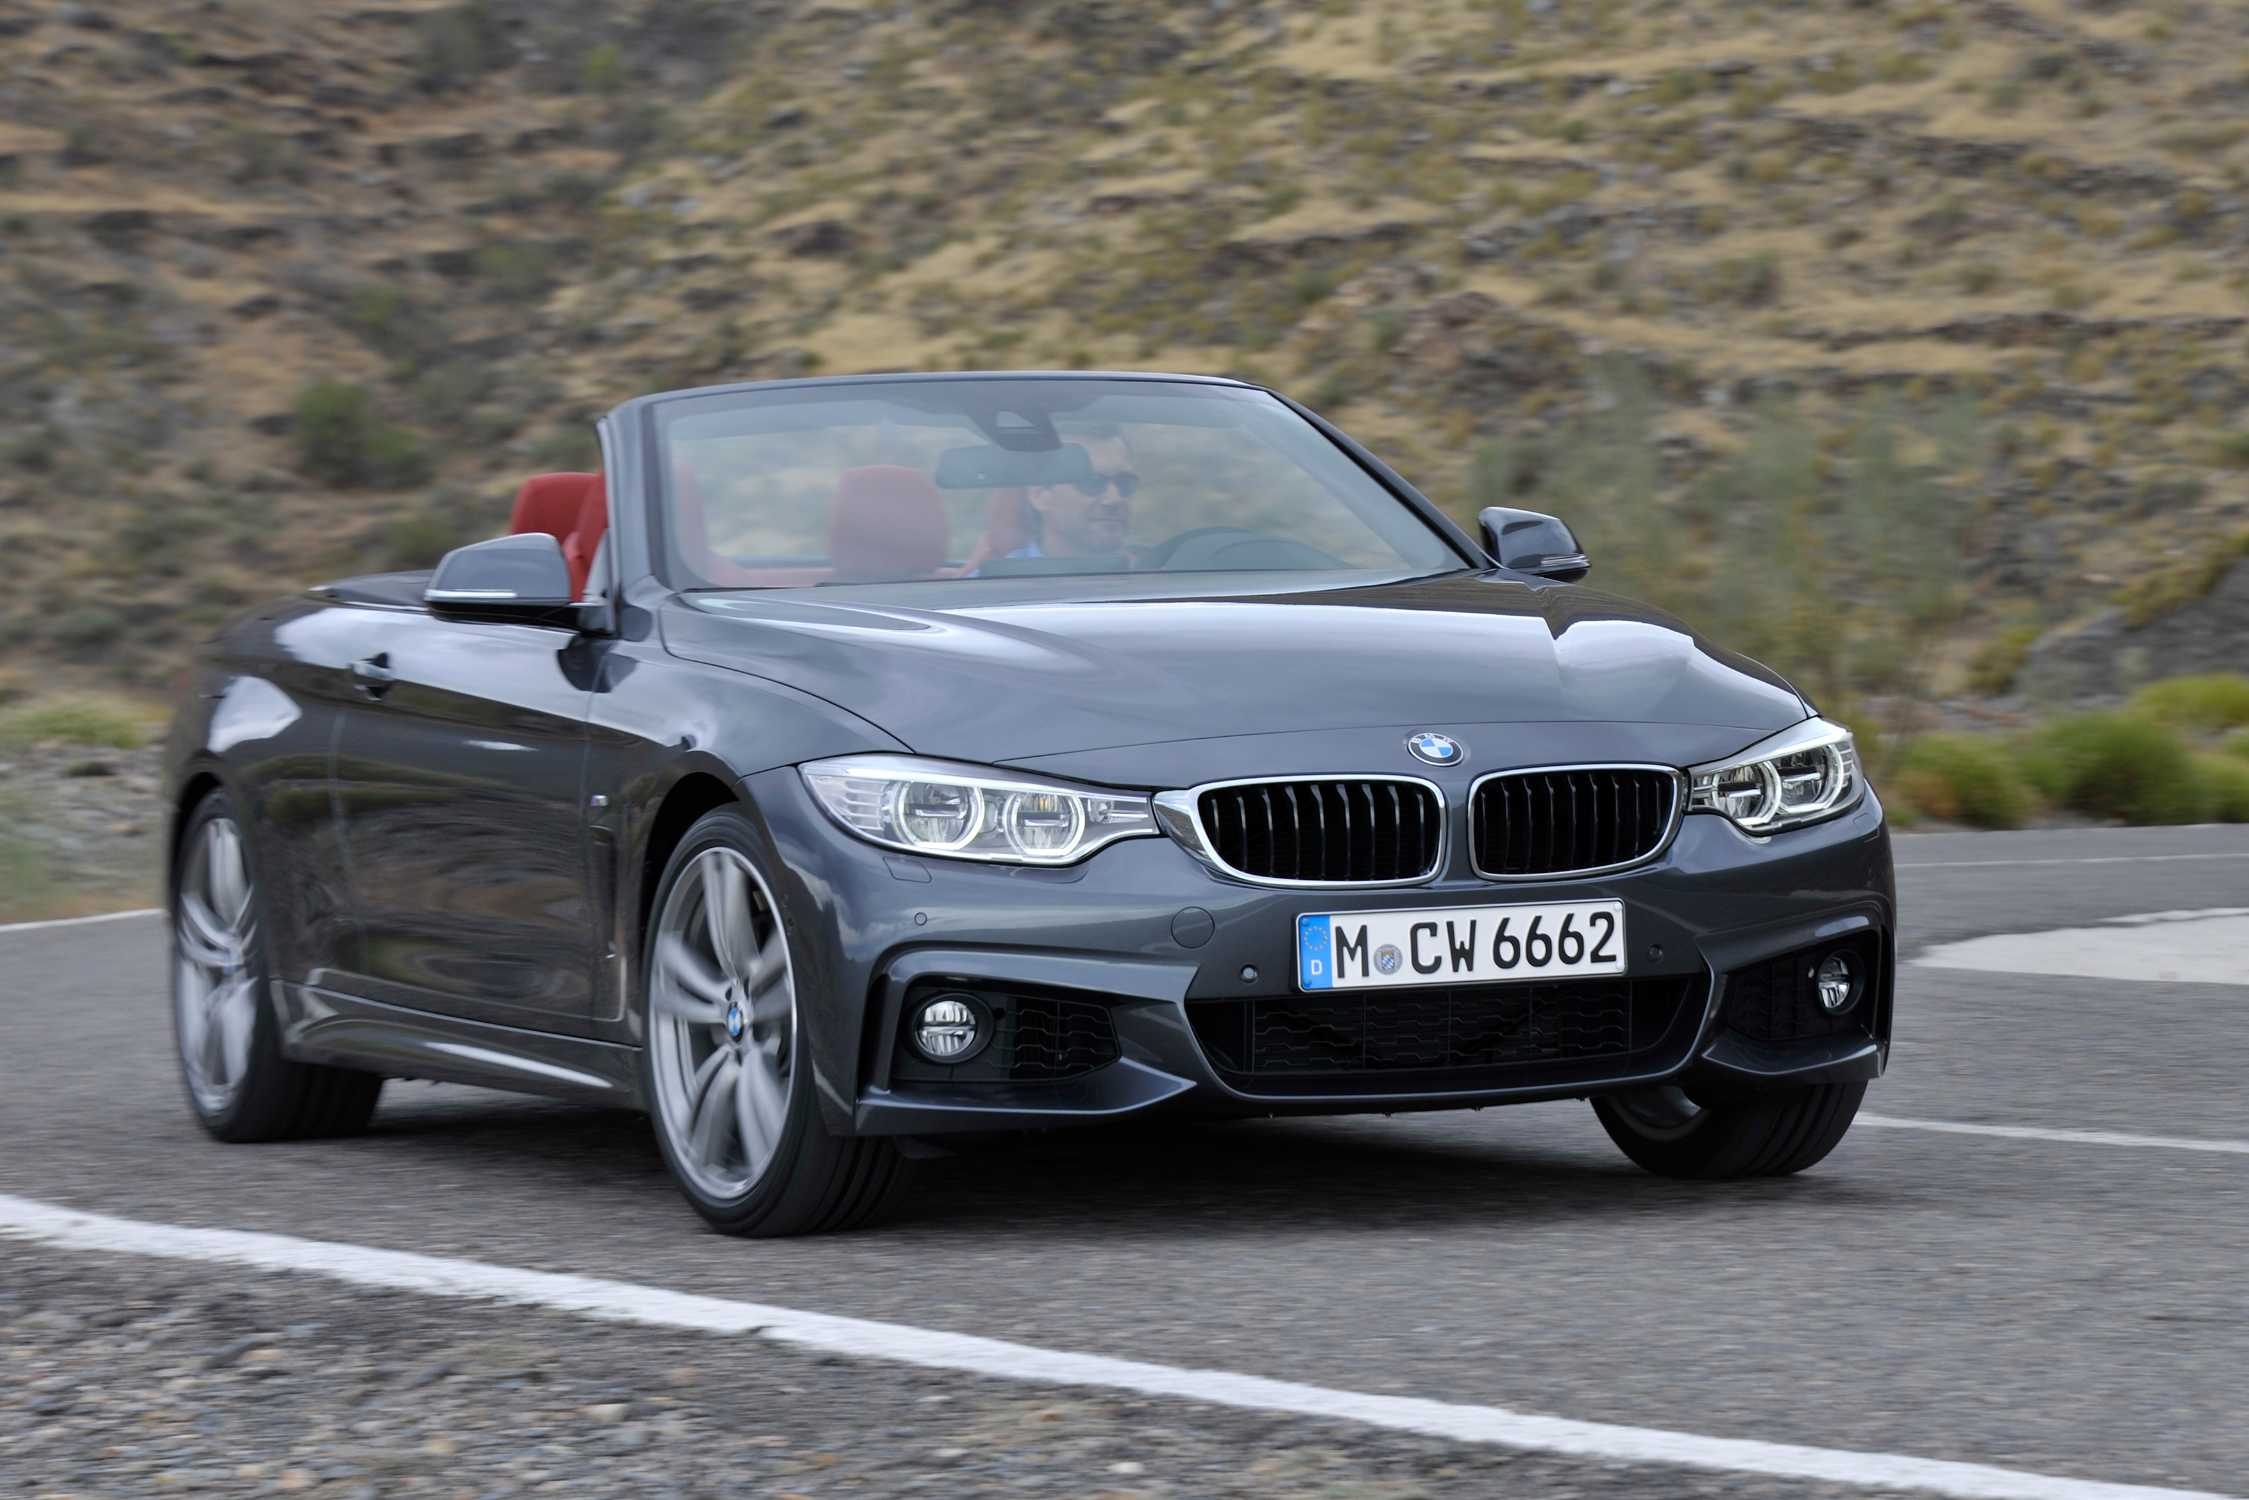 Nice wallpapers BMW 4 Series Cabrio 2249x1500px